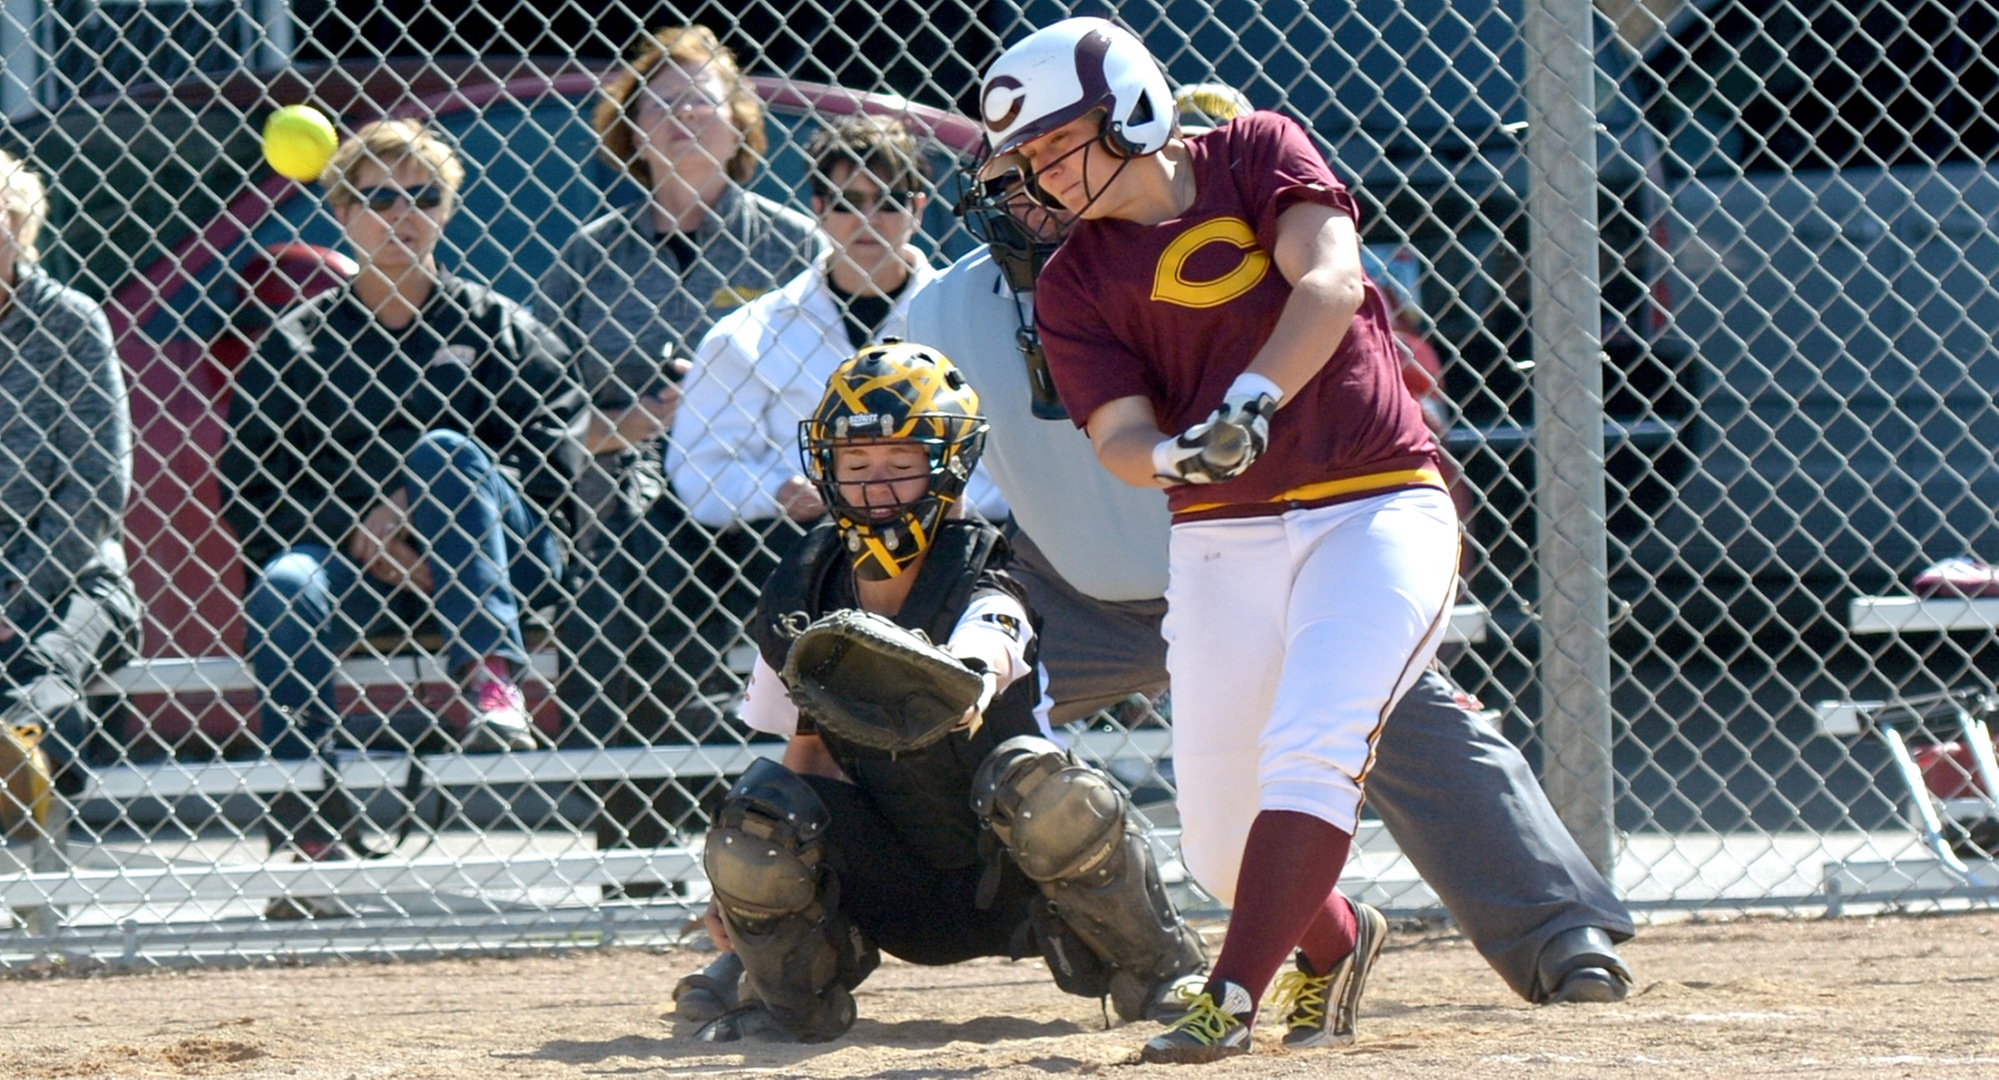 Sophomore Nicole Johannes was one of eight Cobbers to have a hit on the final day in Florida as CC split their two games.